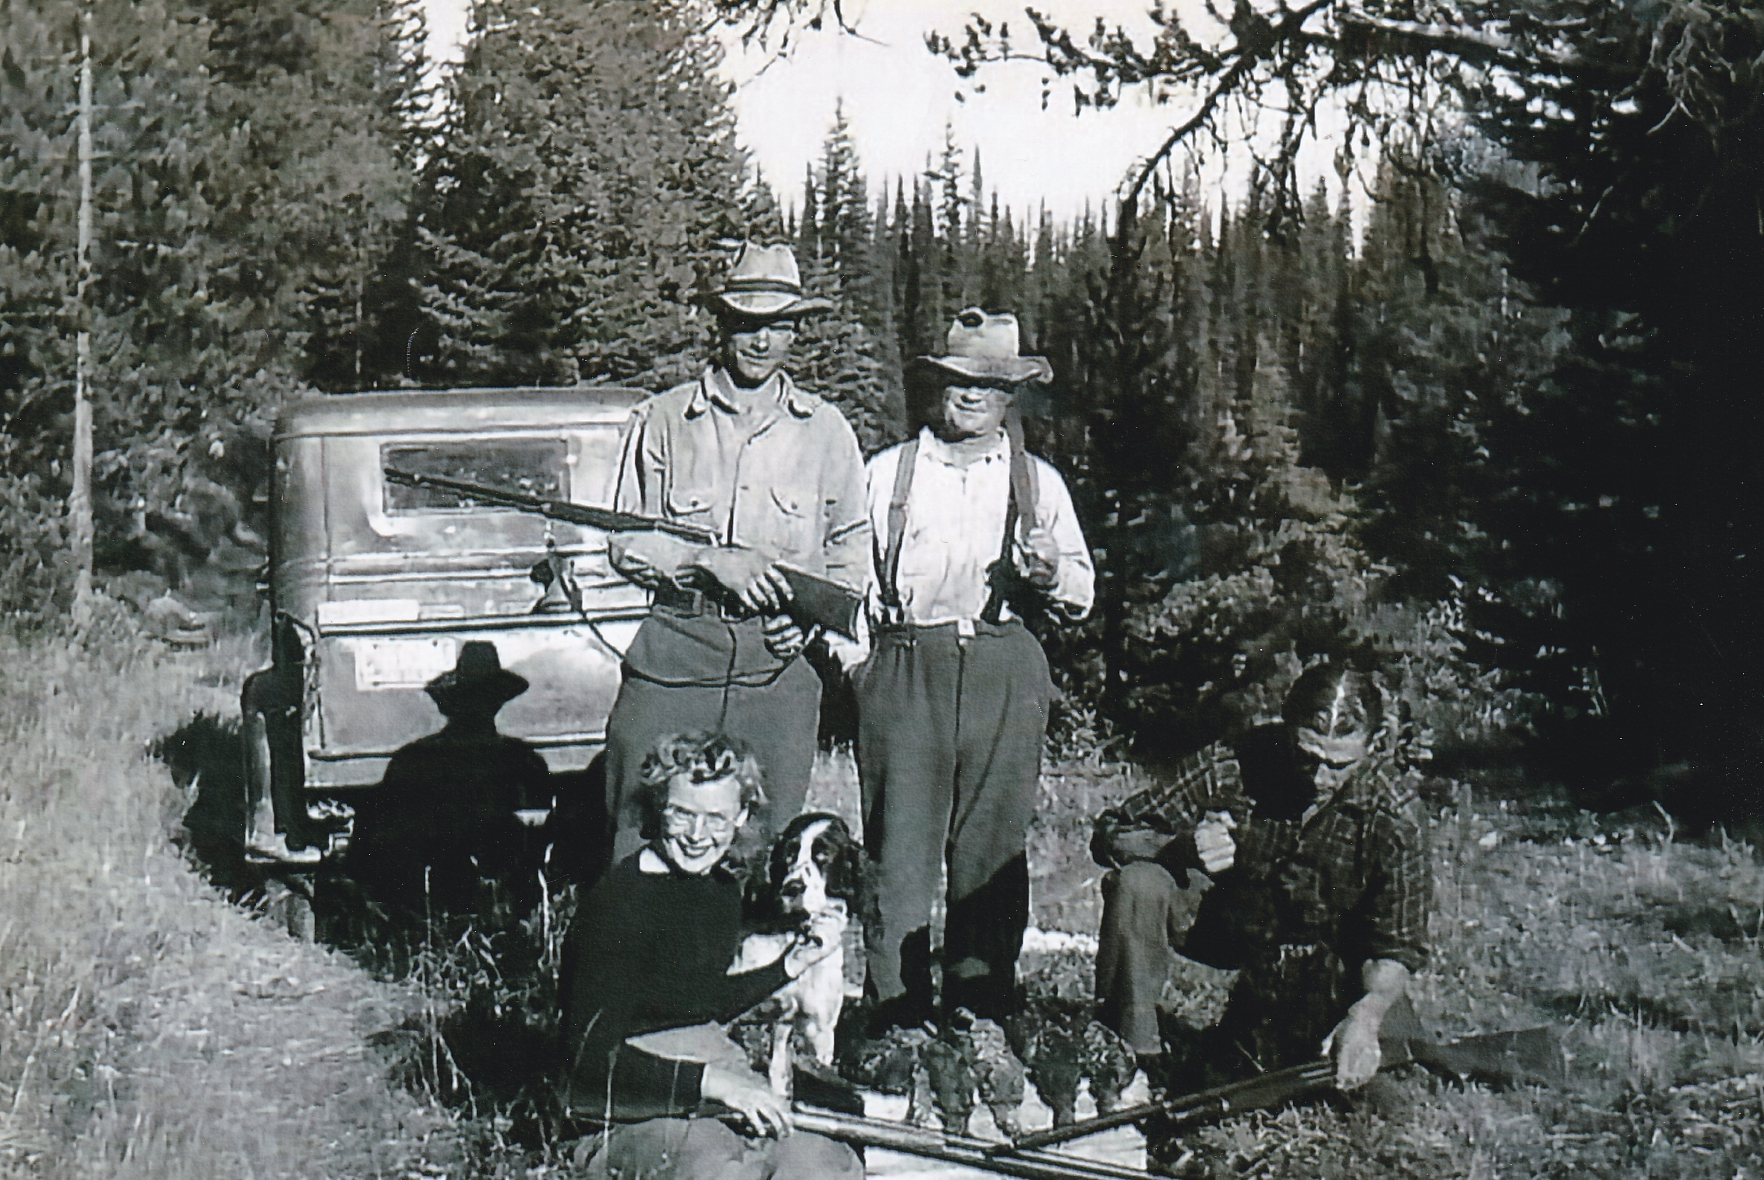 Four people are standing by a truck in the forest. All are holding rifles. Two of the men are standing. A woman is sitting in the foreground petting a dog. Beside the woman are several pheasants that have been shot. A man is crouched in the foreground.